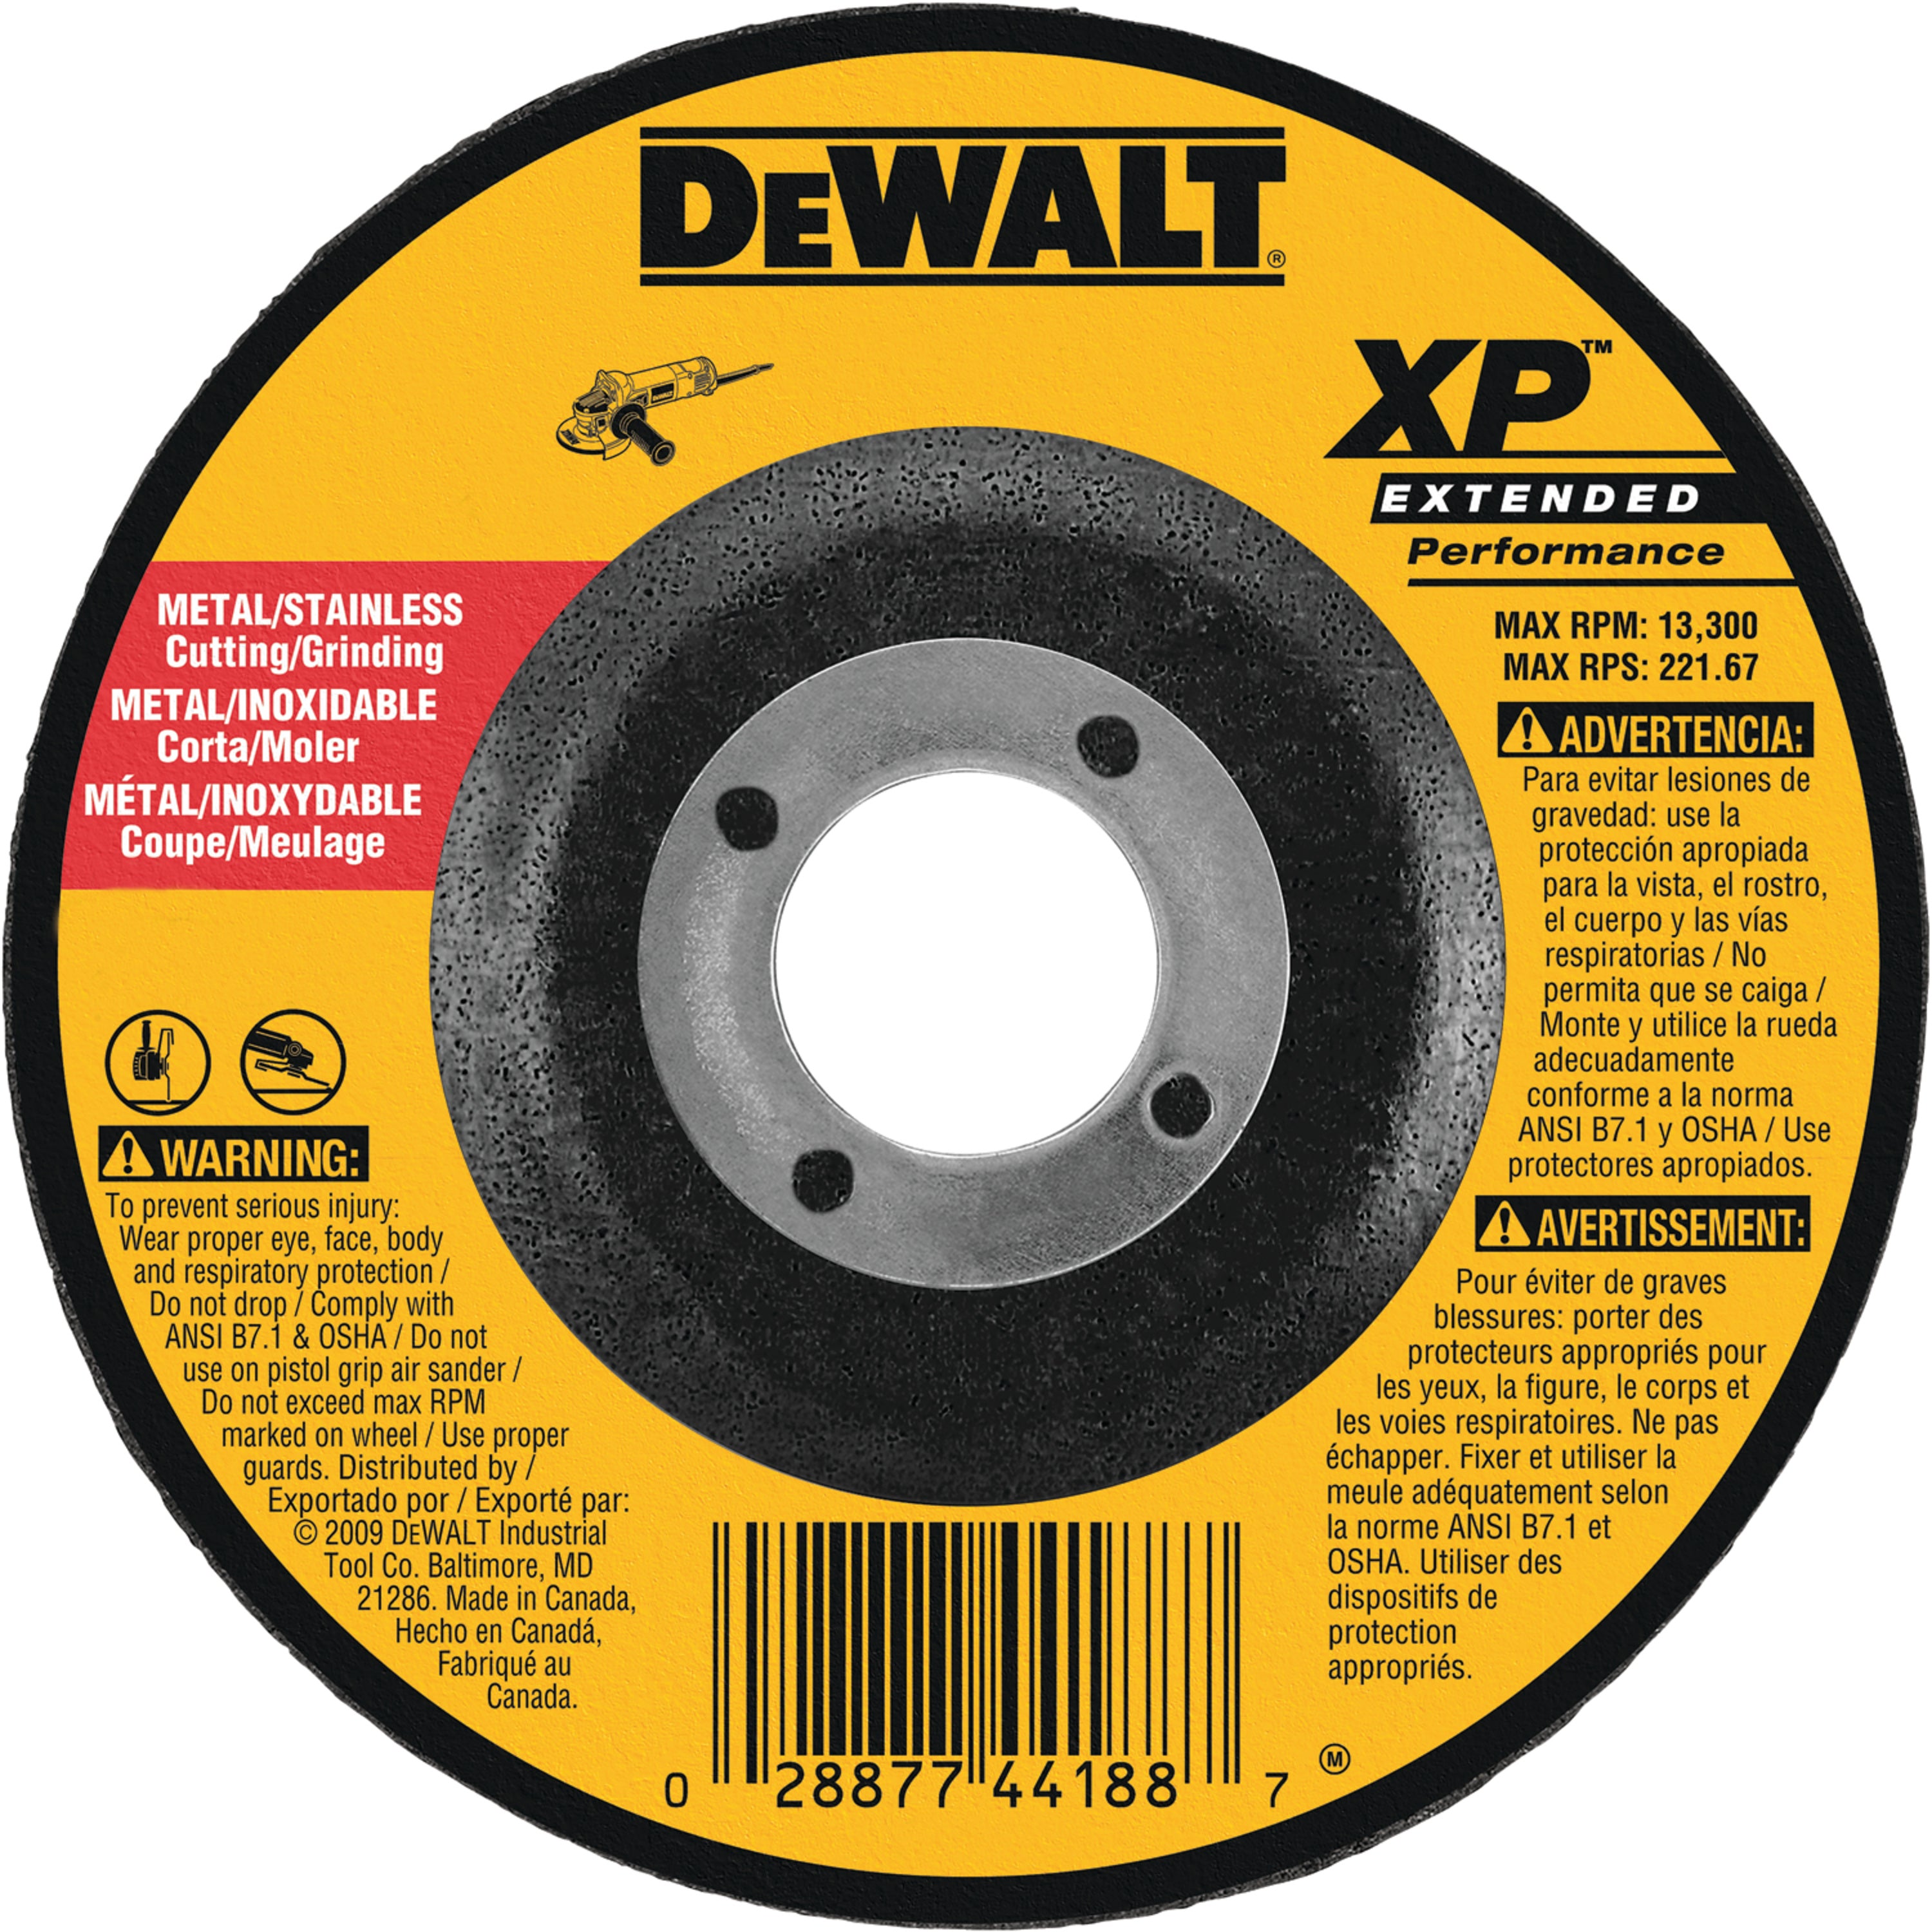 DEWALT DW8808 4-1/2-Inch by 1/4-Inch Extended Performance Grinding Wheel, 7/8-Inch Arbor - wise-line-tools